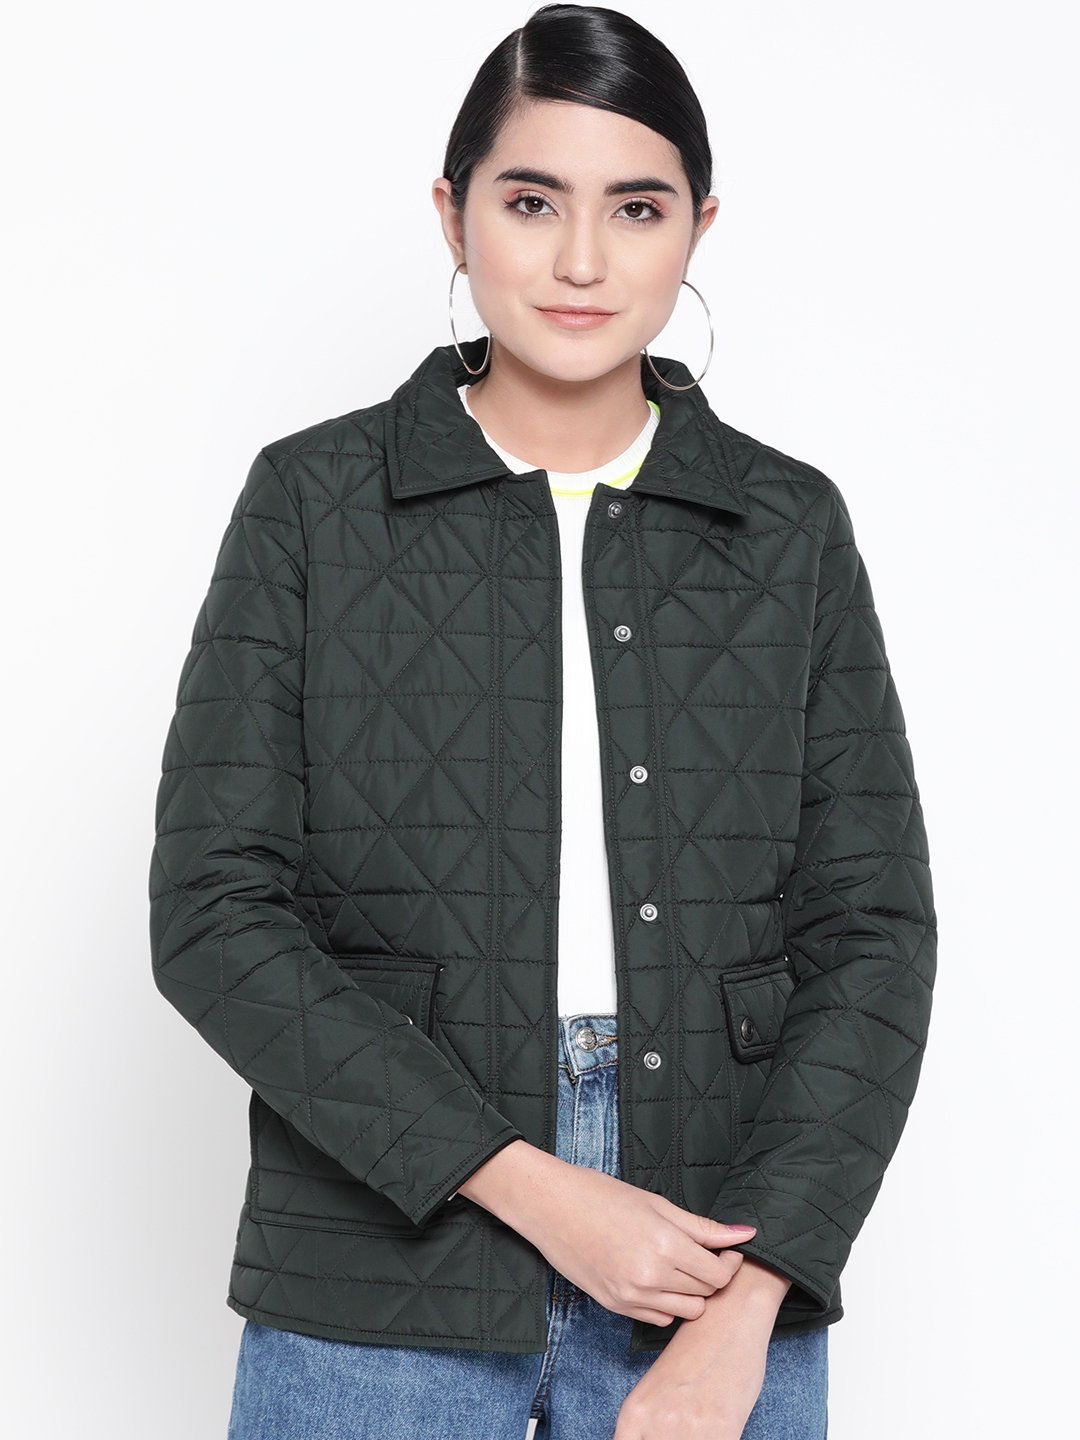 Buy U.S. Polo Assn. Women Green Solid Quilted Jacket - Jackets for Women 10463478 | Myntra